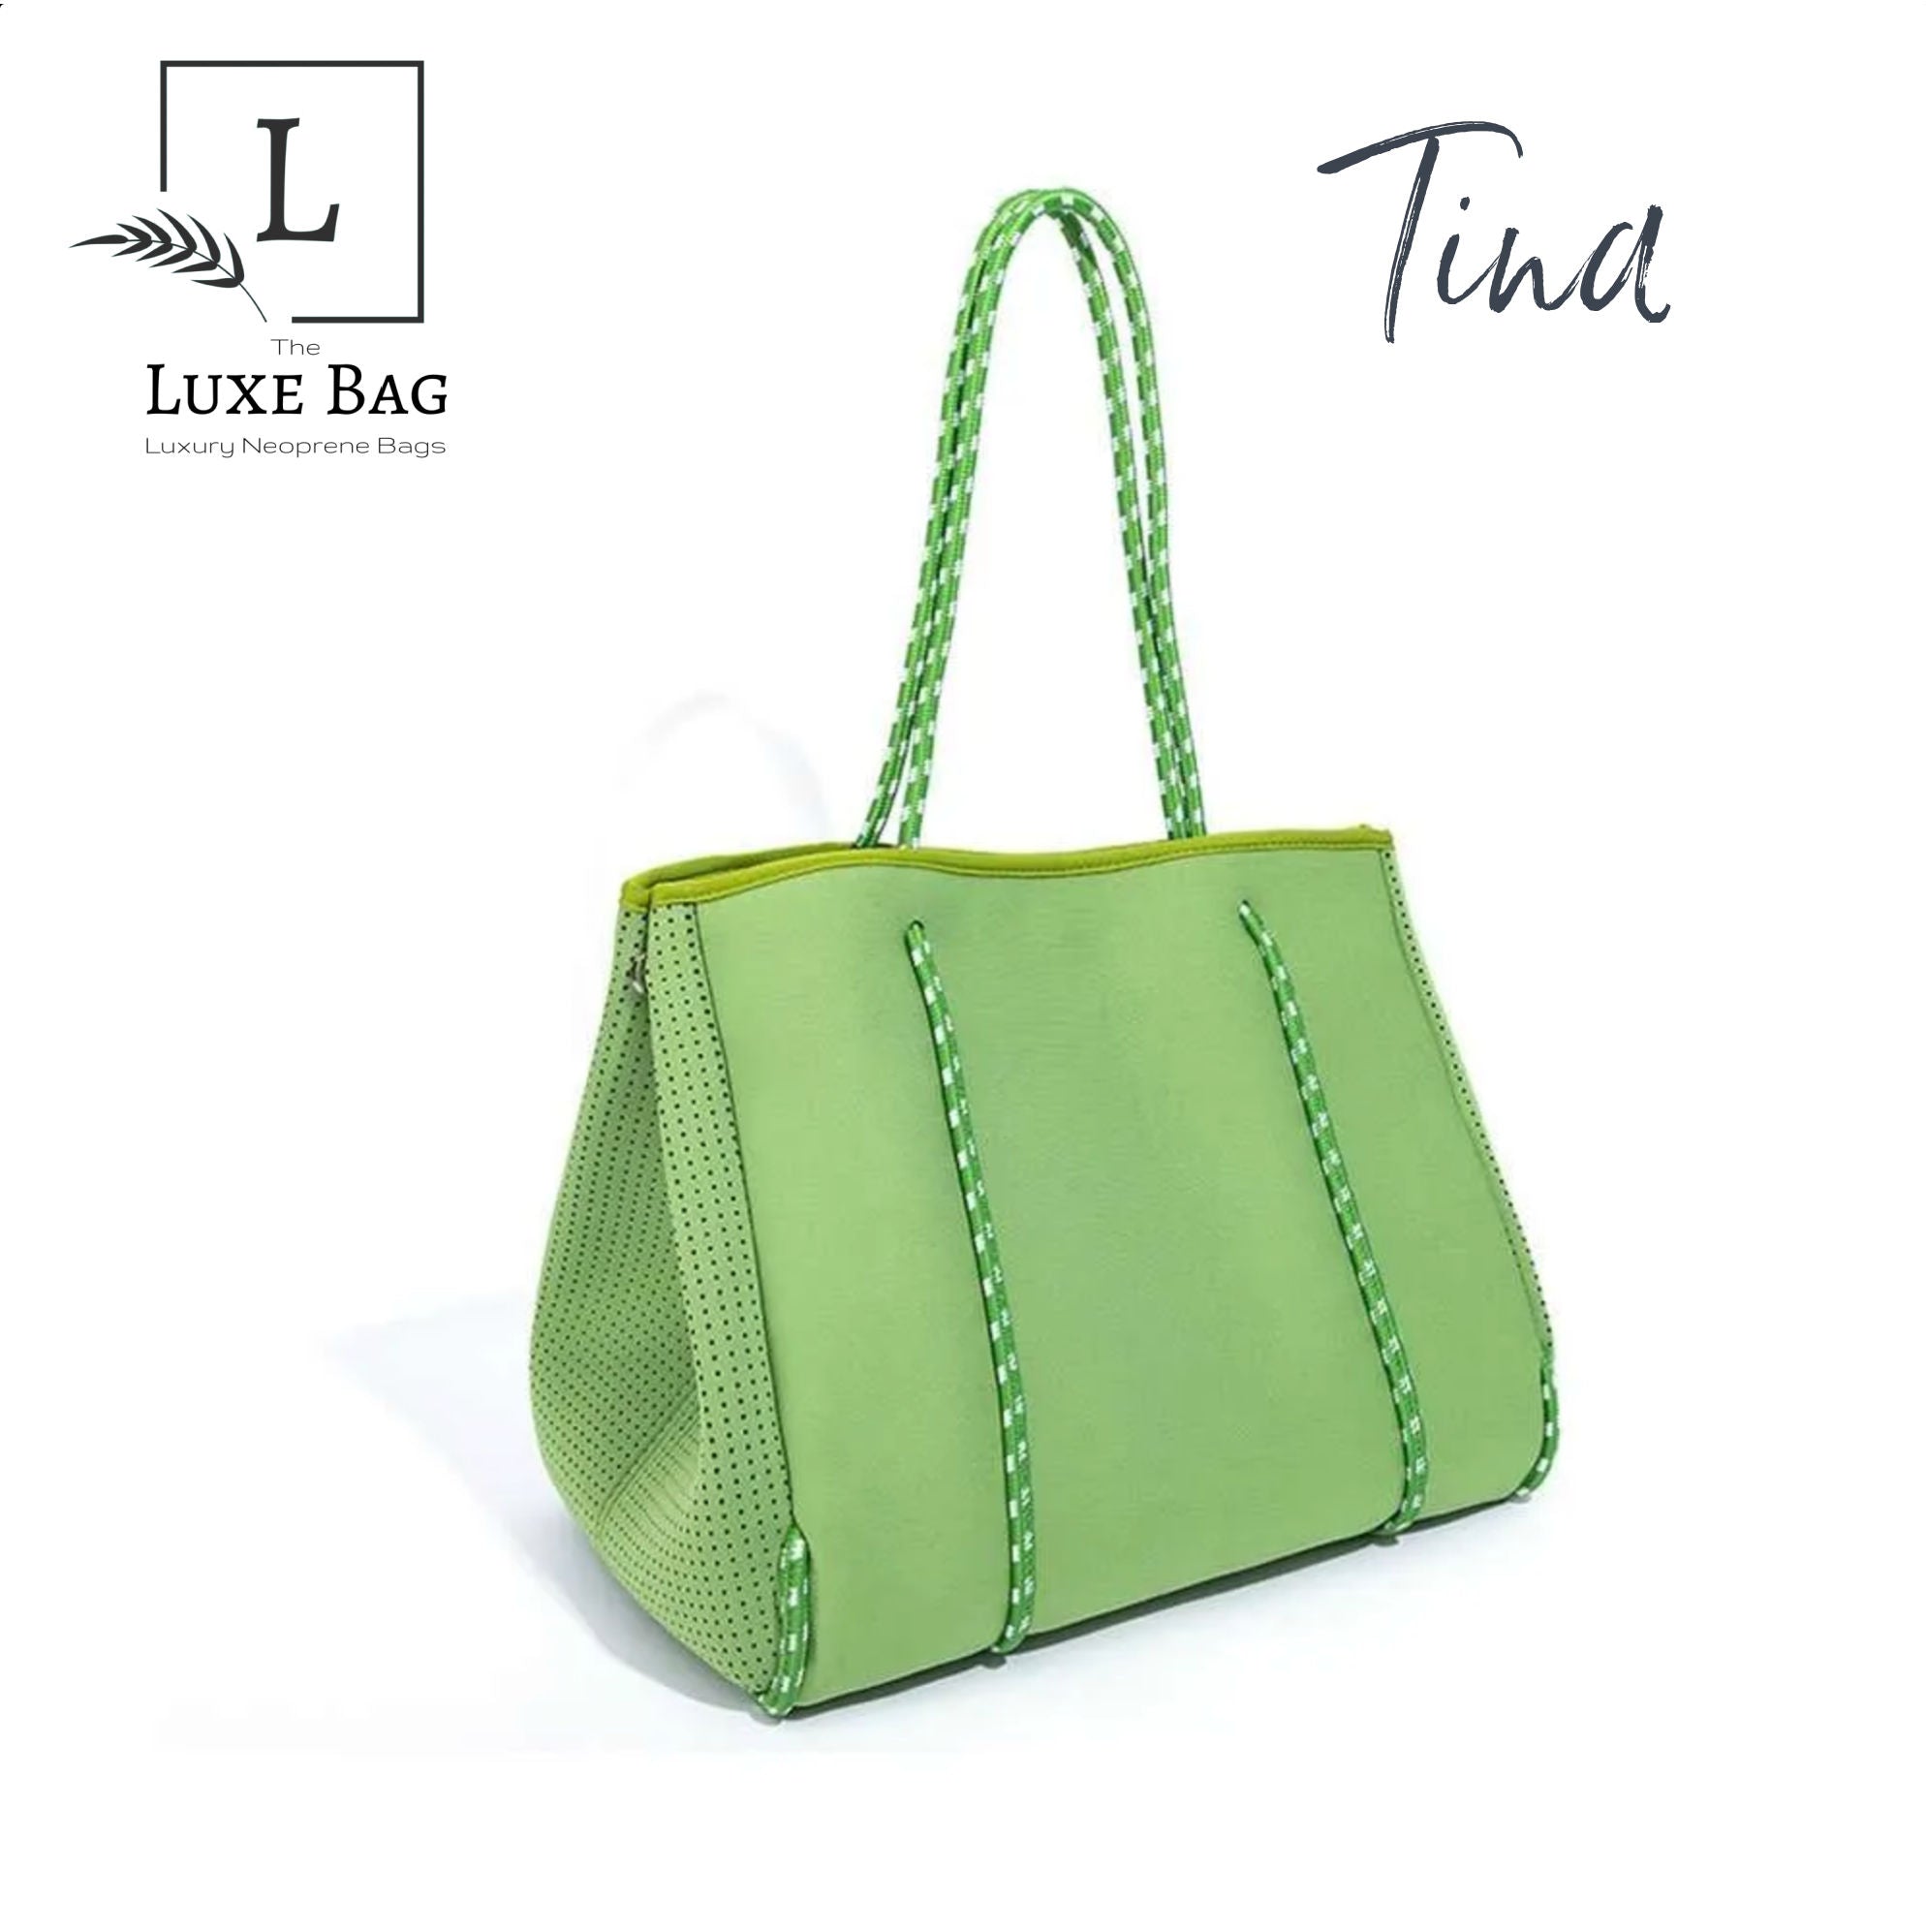 The Luxe Bag w/Double Inner Zippers